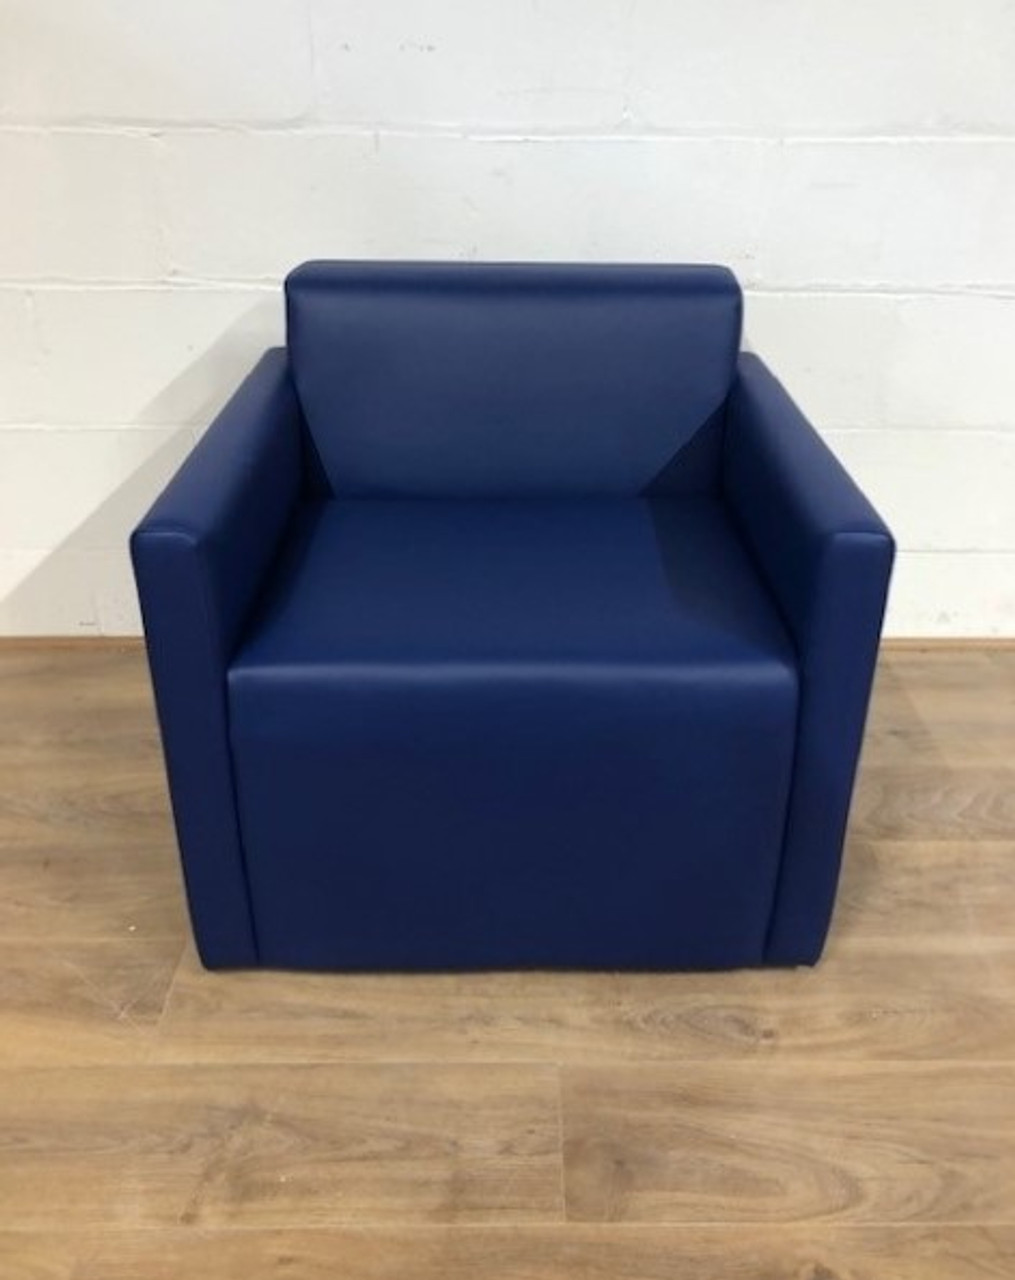 second hand office furniture essex_refurbished tub chairs_wipe clean reception chairs to buy essex_wipe down office furniture chelmsford essex